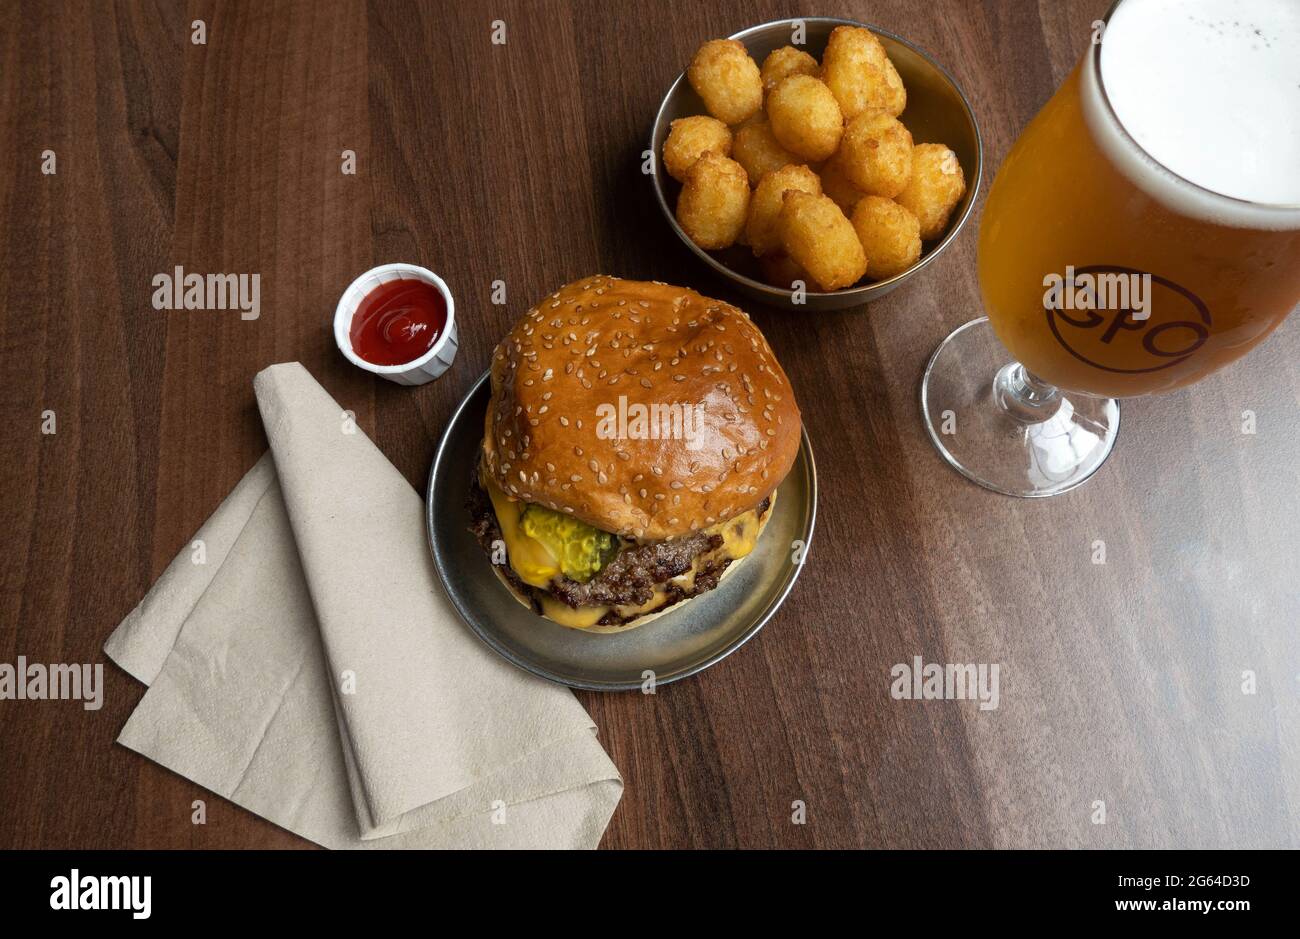 A Cheeseburger with tater tots and a schooner of beer at Patty B's Burgers in GPO Food Hall in Liverpool Stock Photo